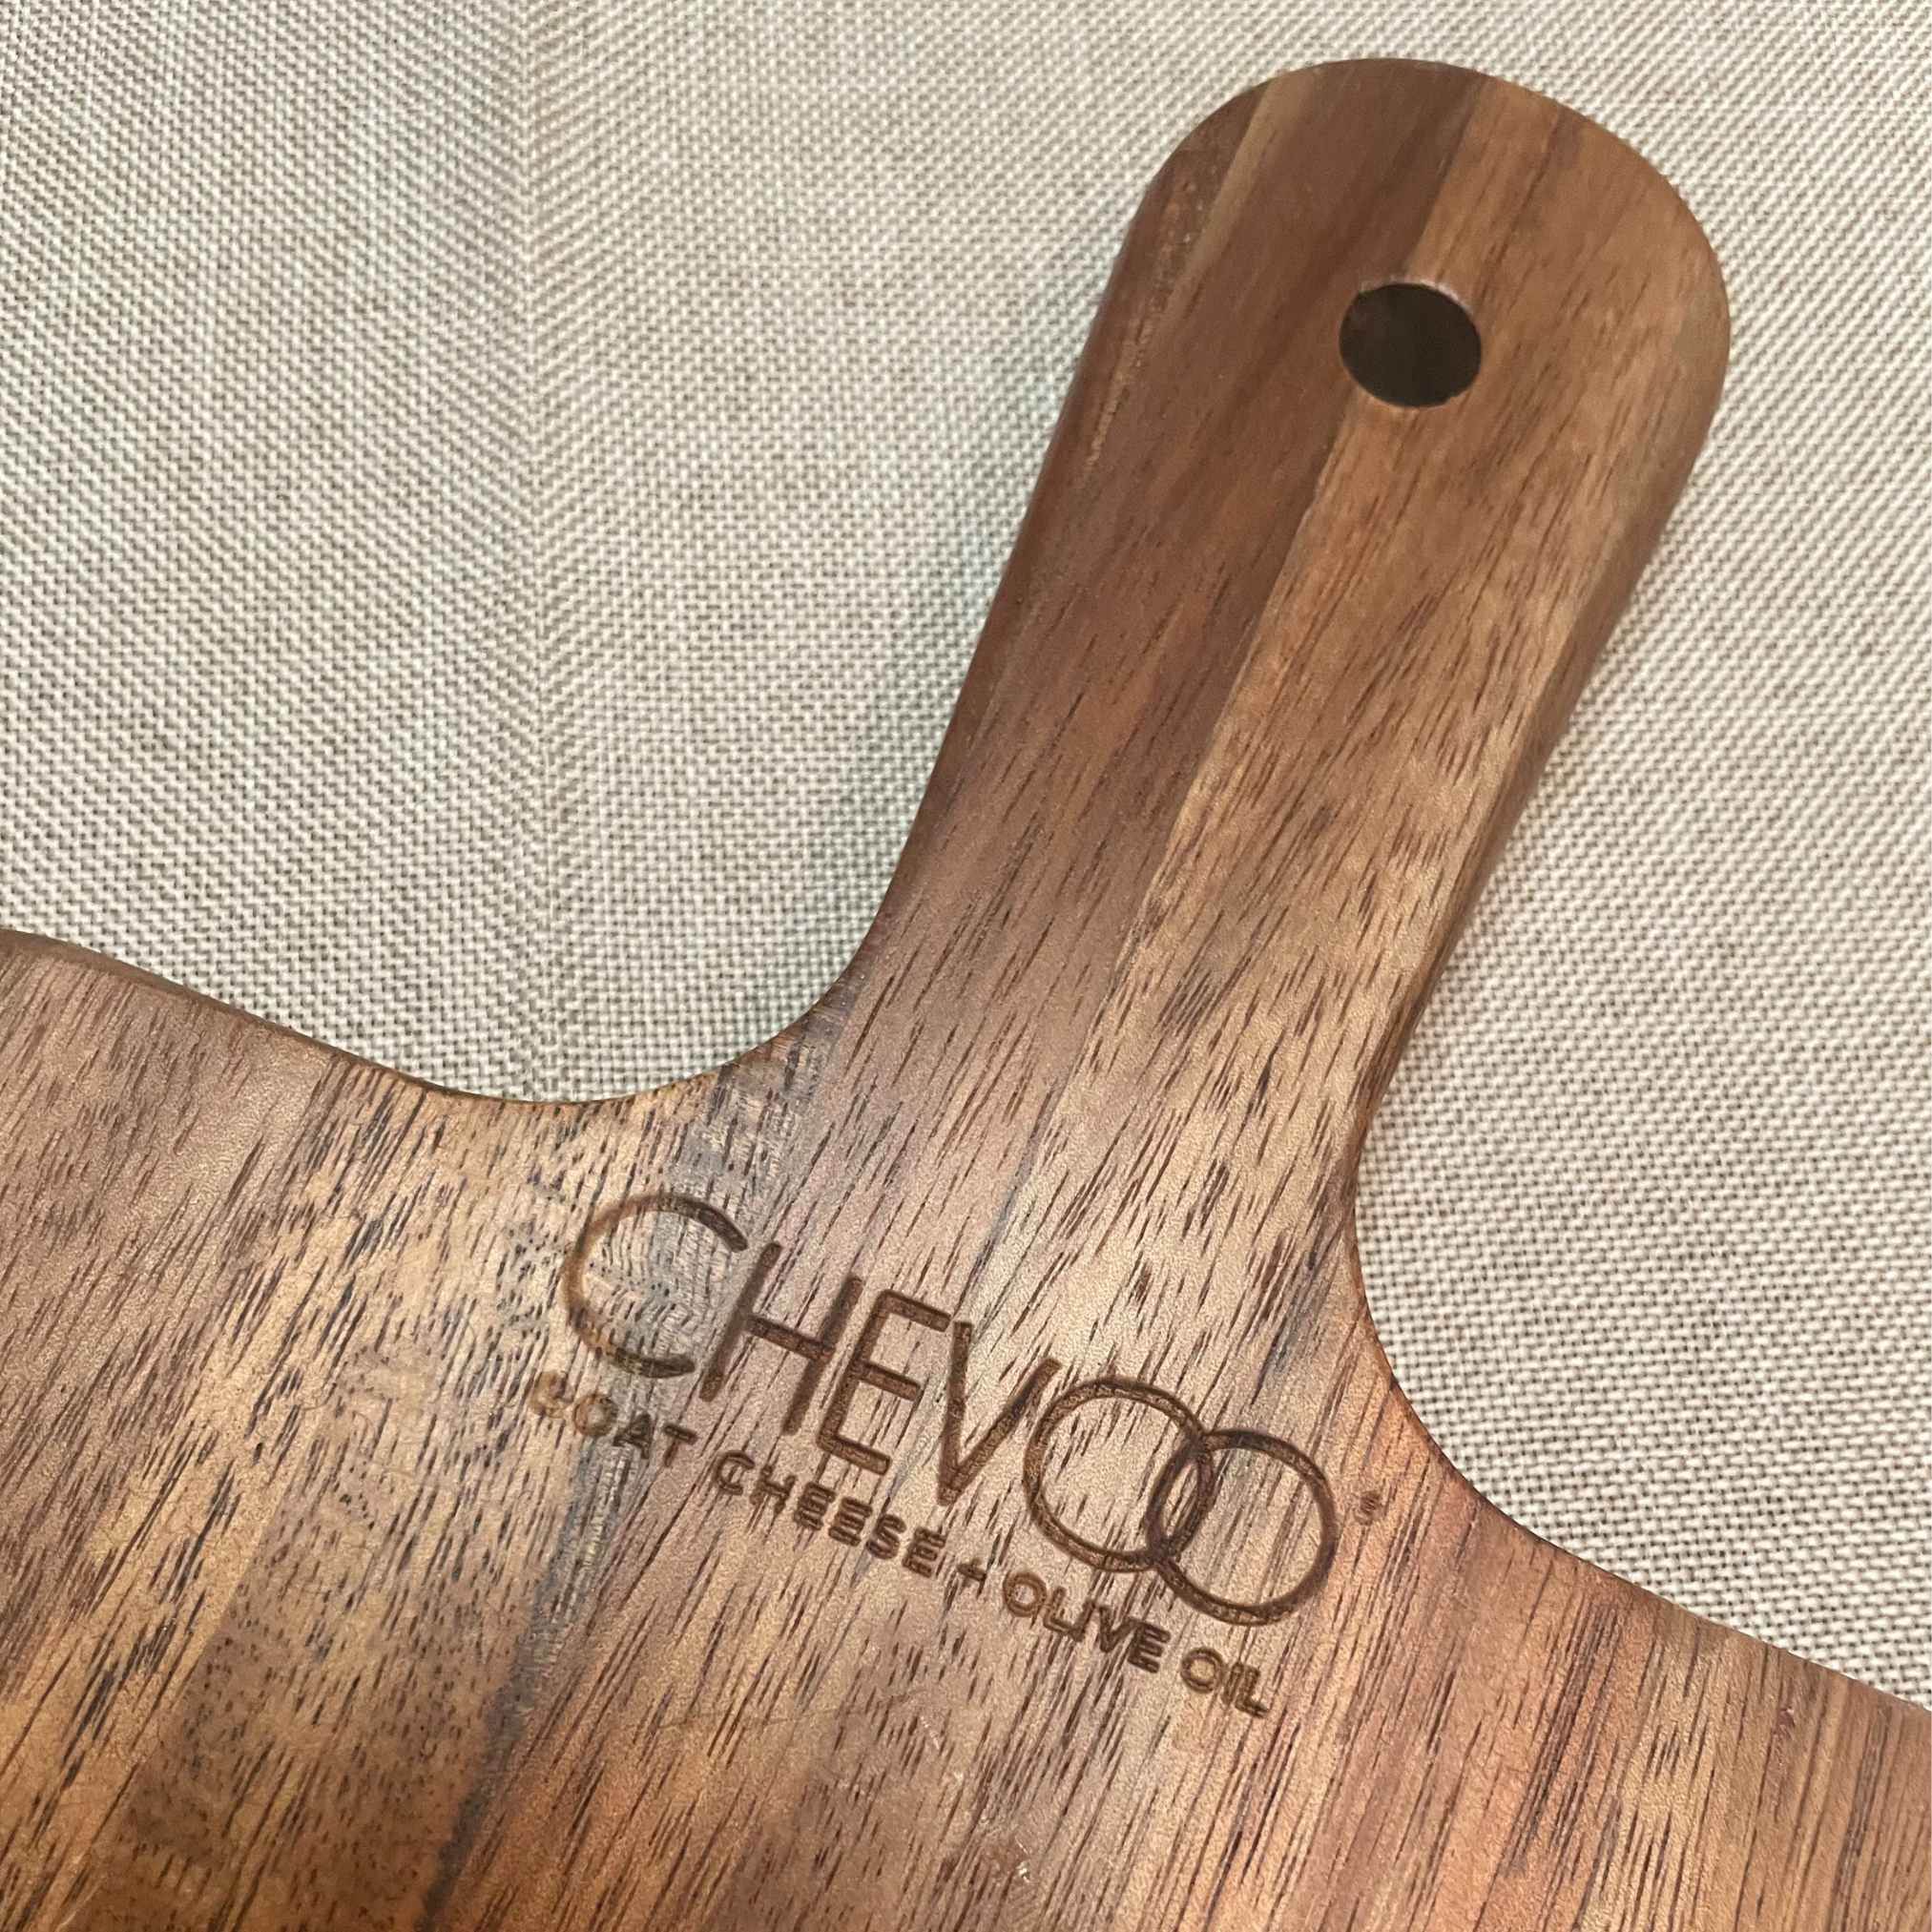 CHEVOO Large Cheese Board